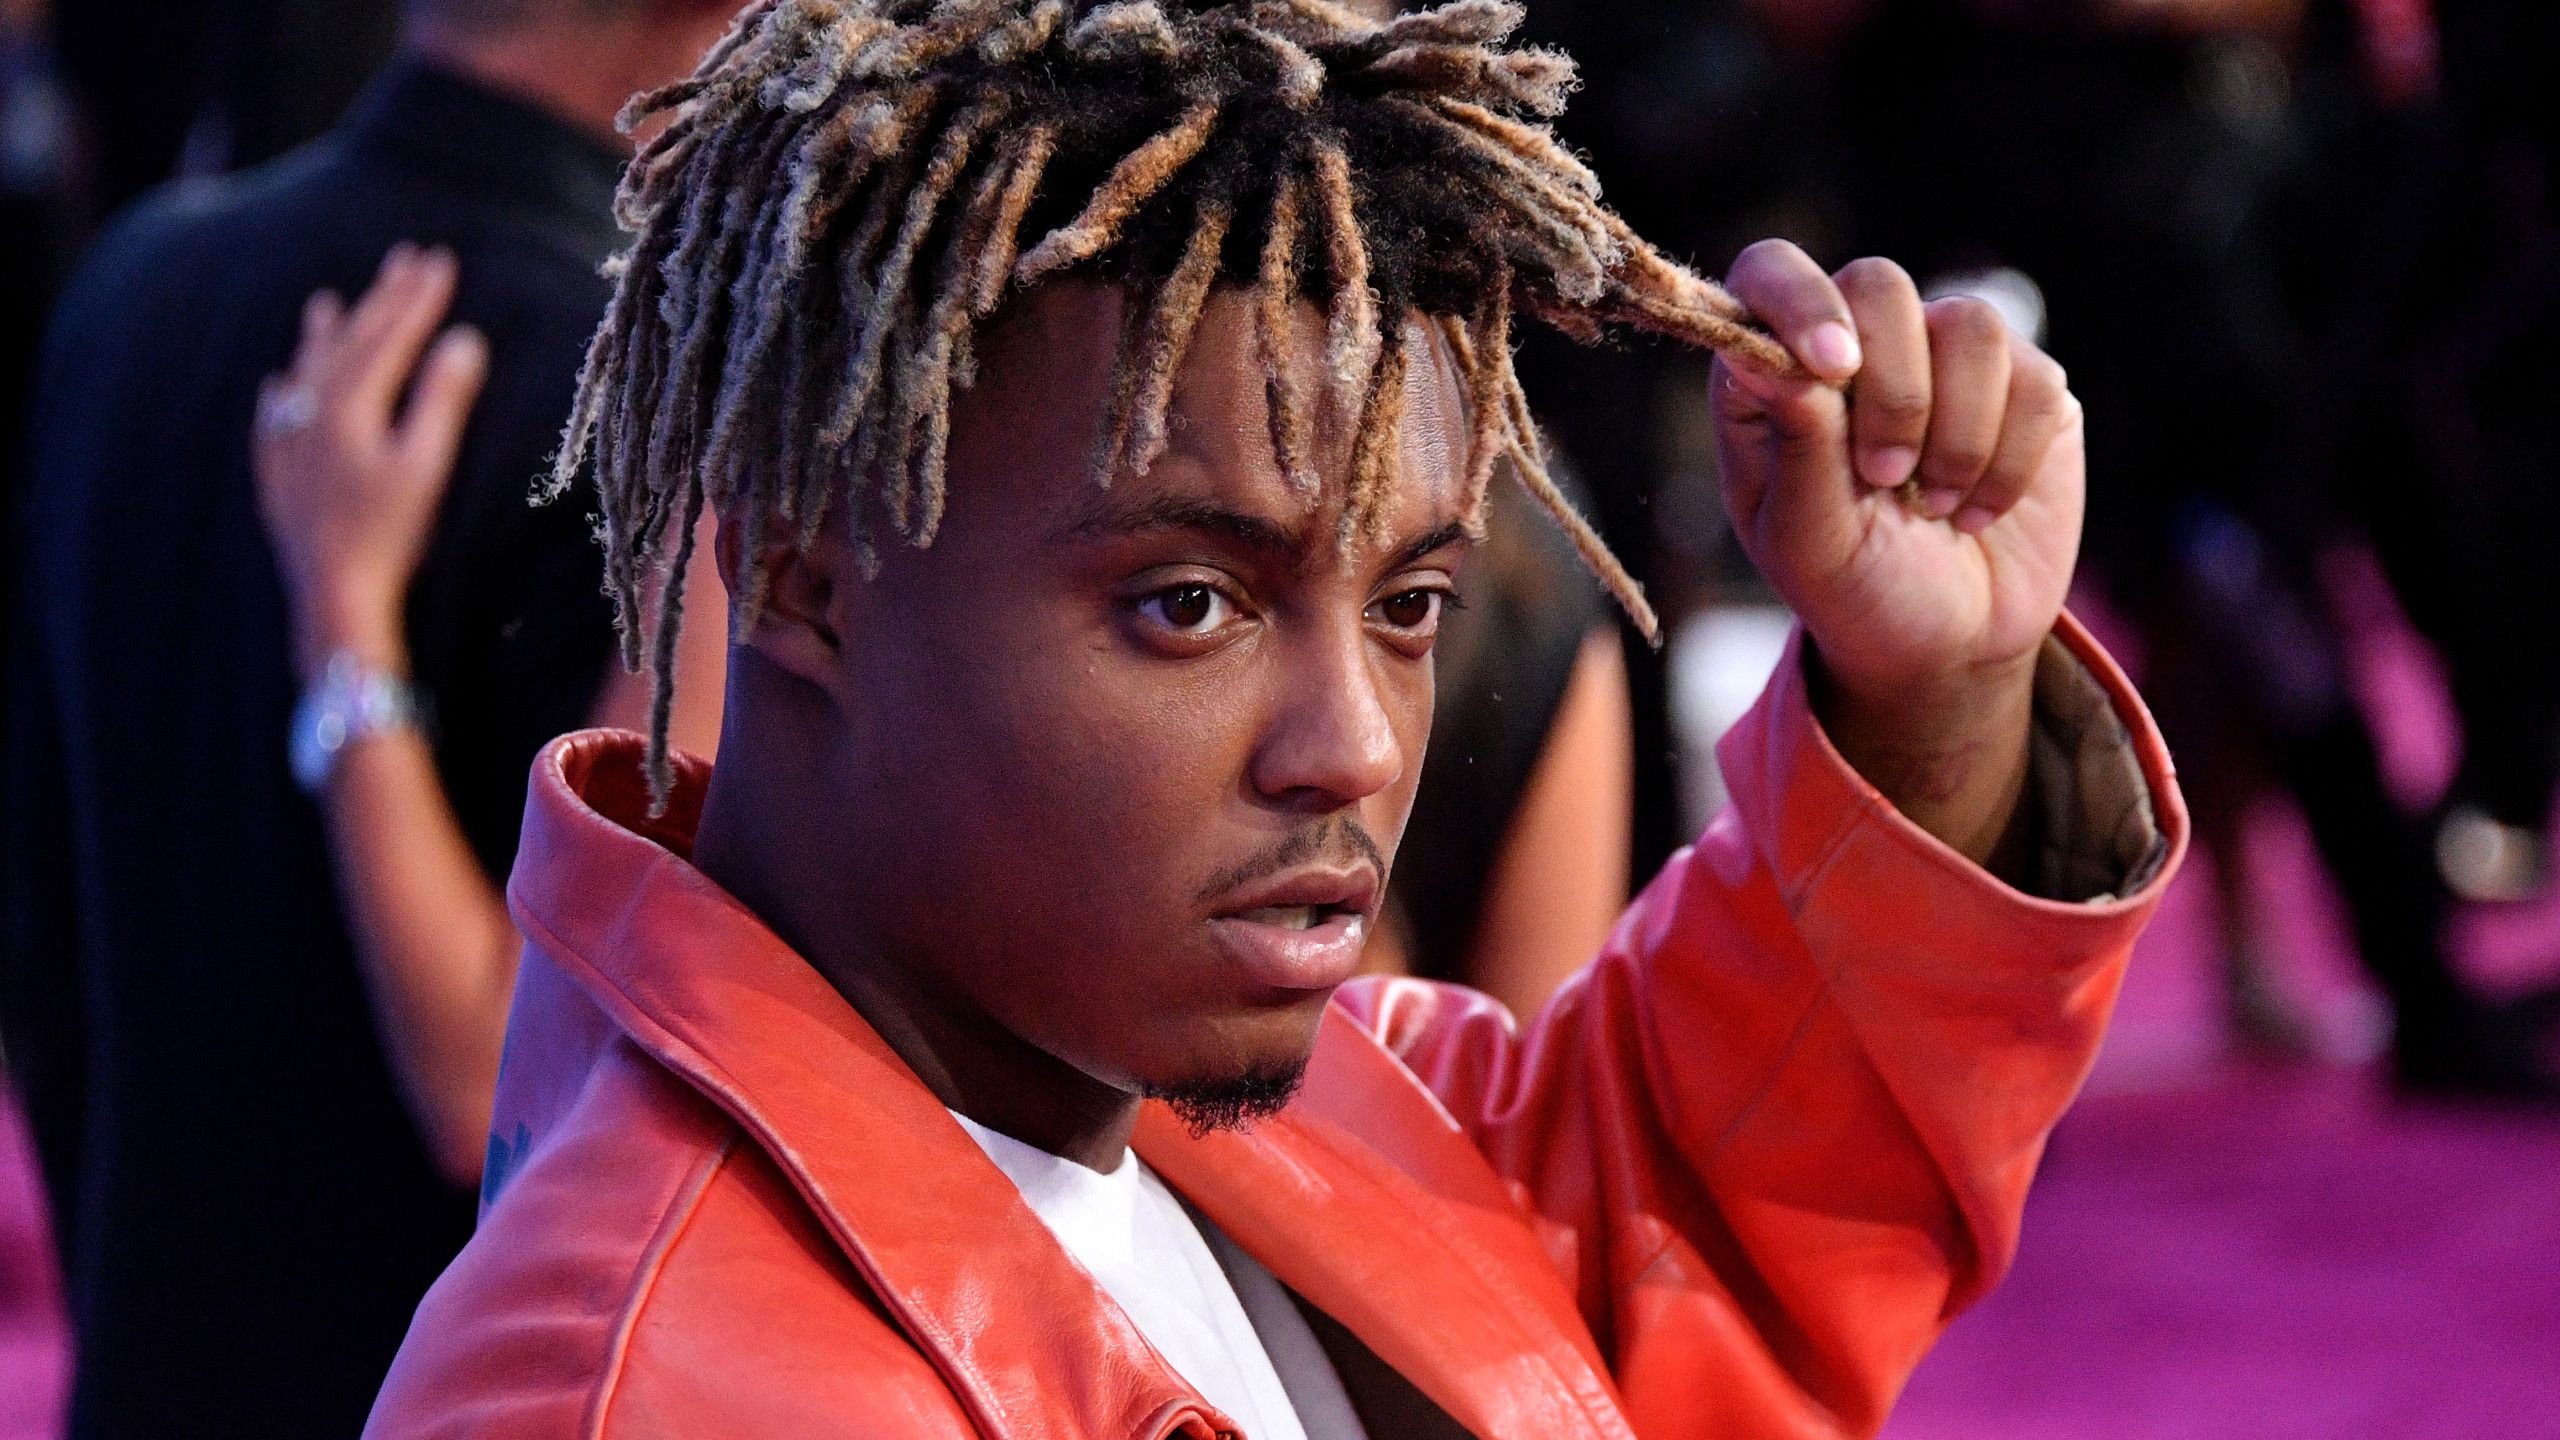 Juice WRLD died from overdose, according to medical examiner